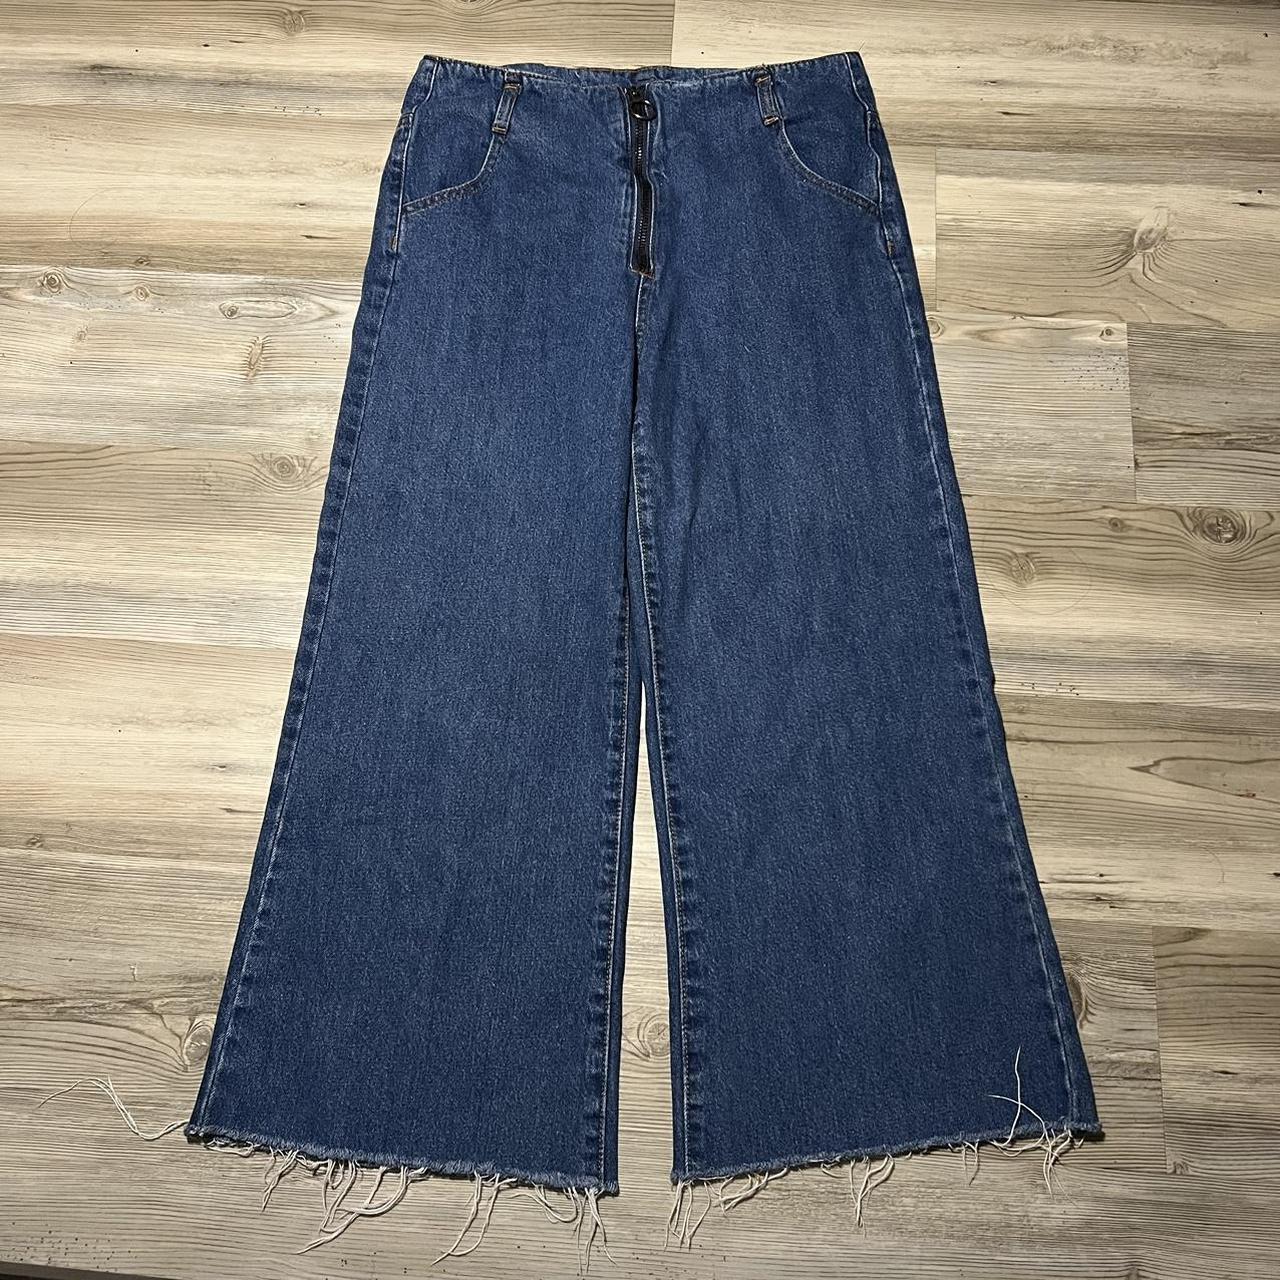 wide leg jeans no flaws! says size 7 but fits XS-S!... - Depop